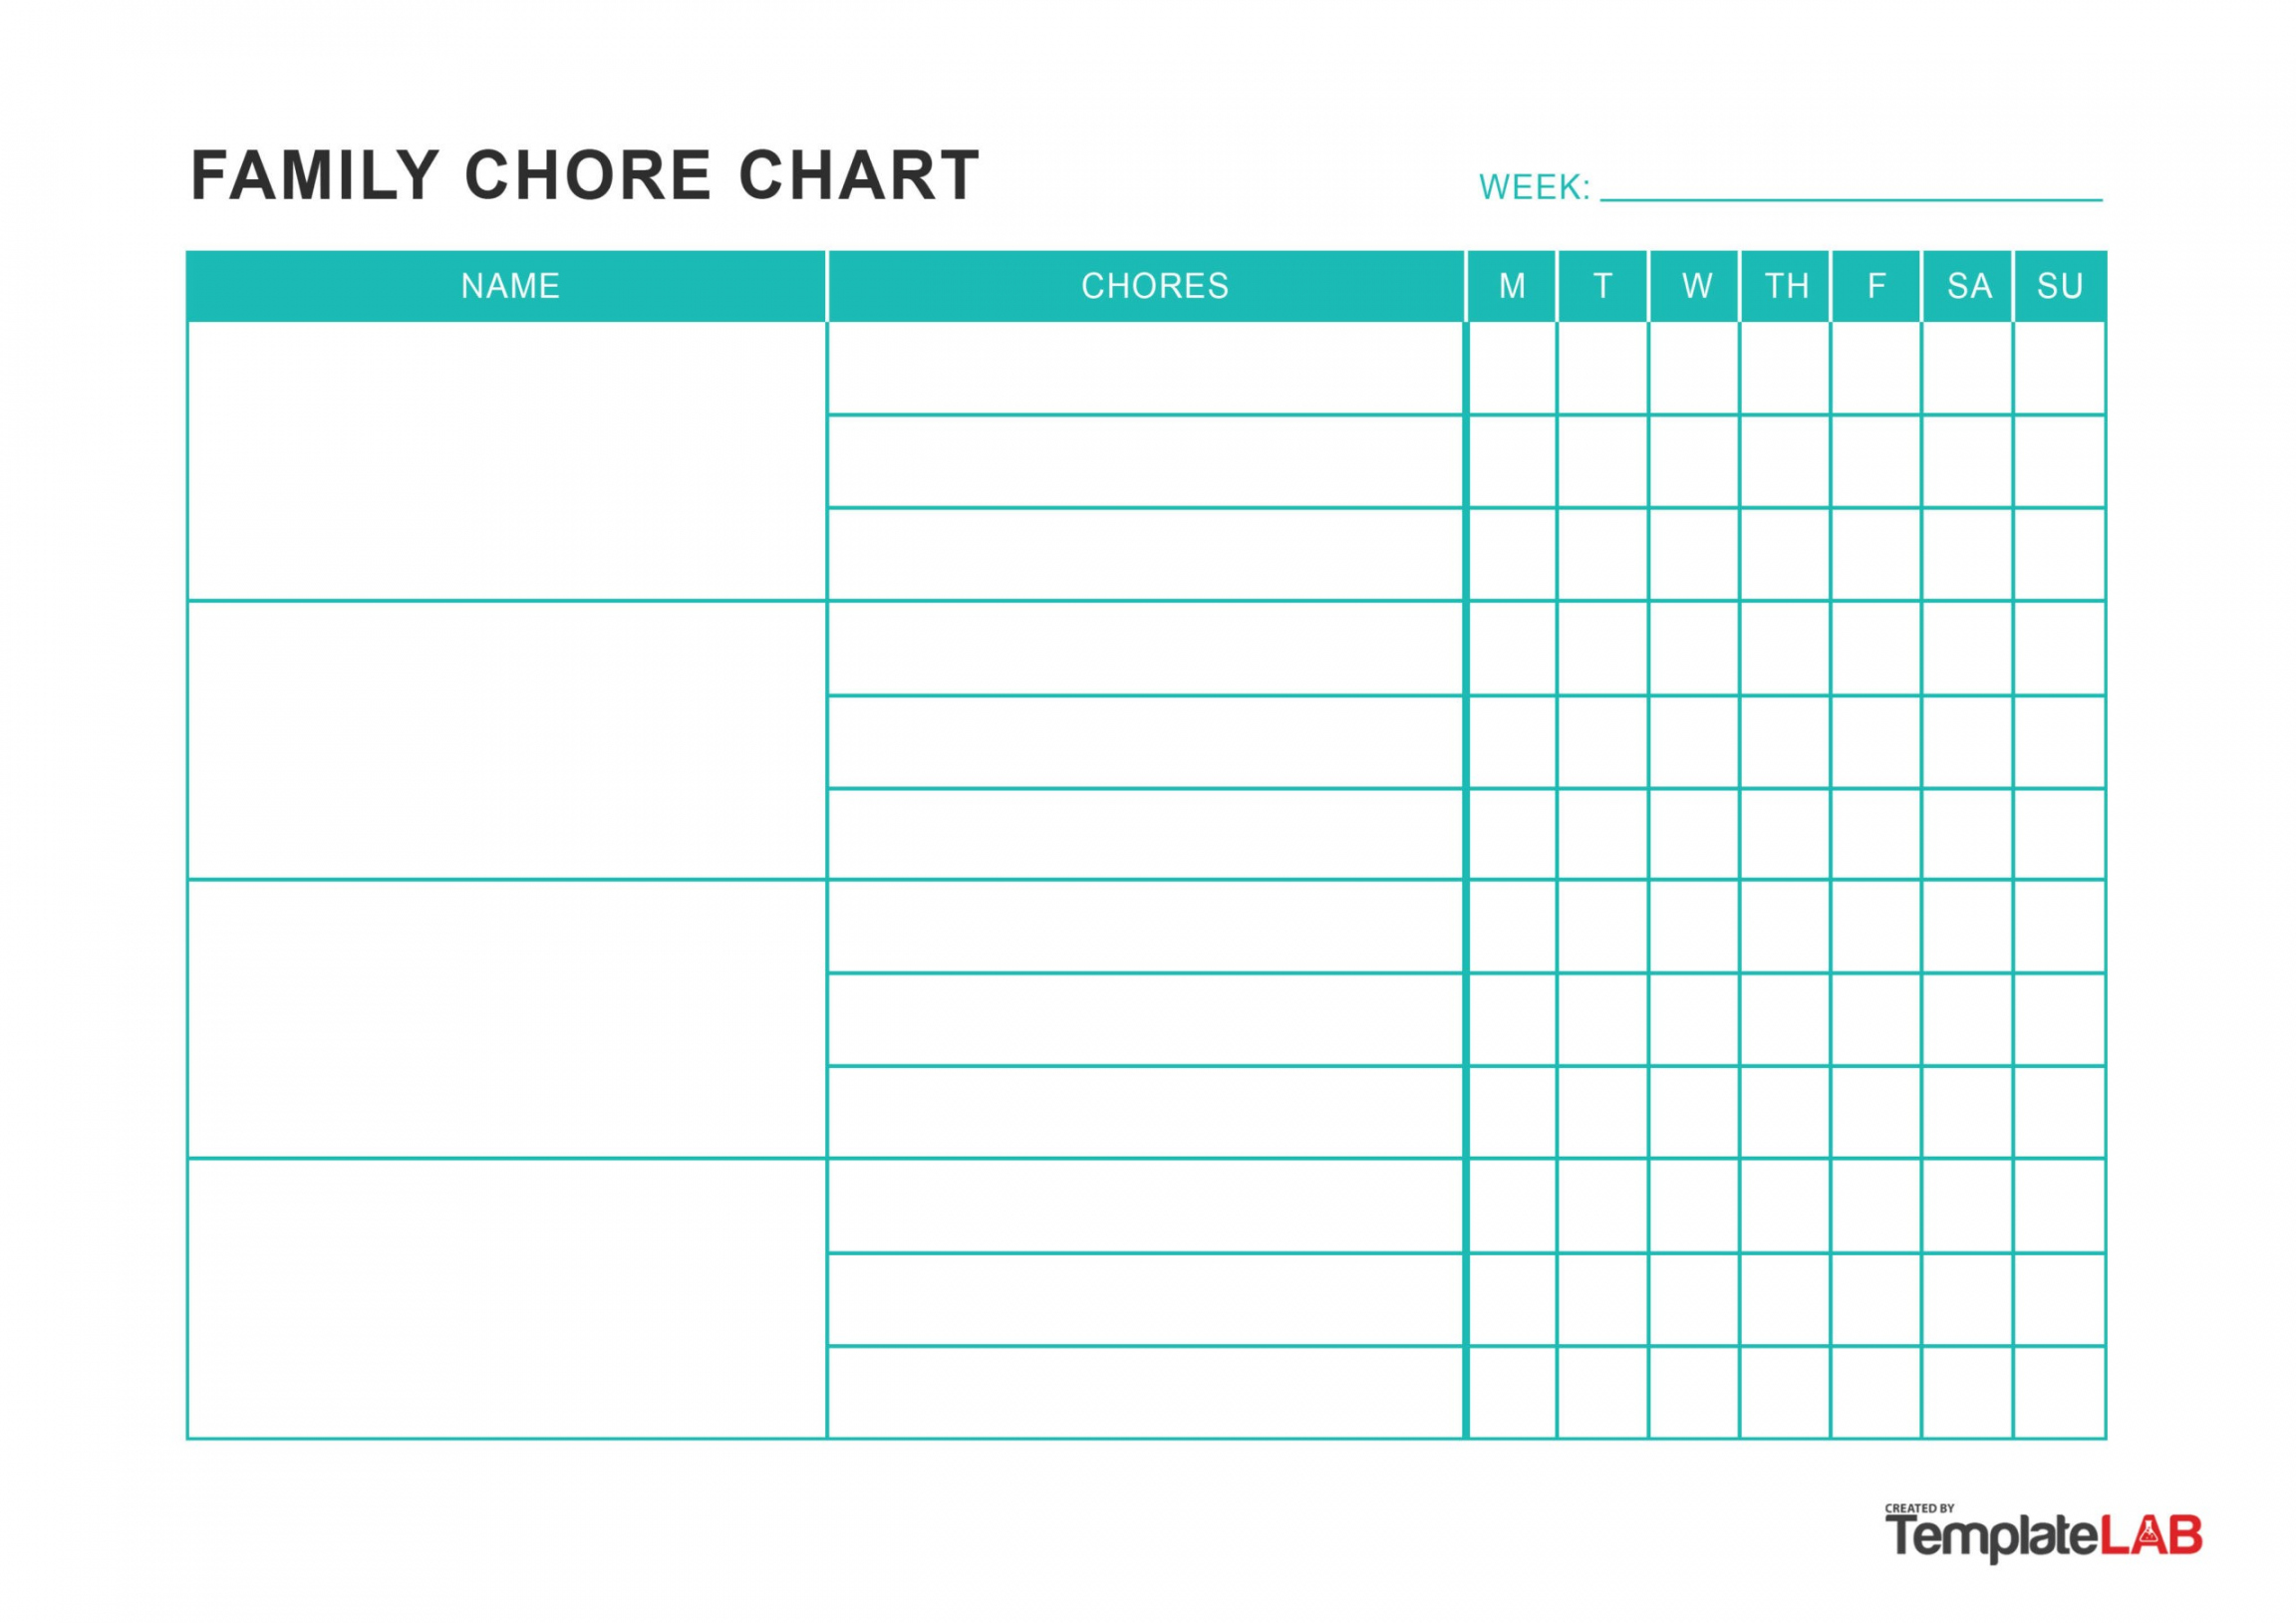 FREE Chore Chart Templates for Kids ᐅ TemplateLab